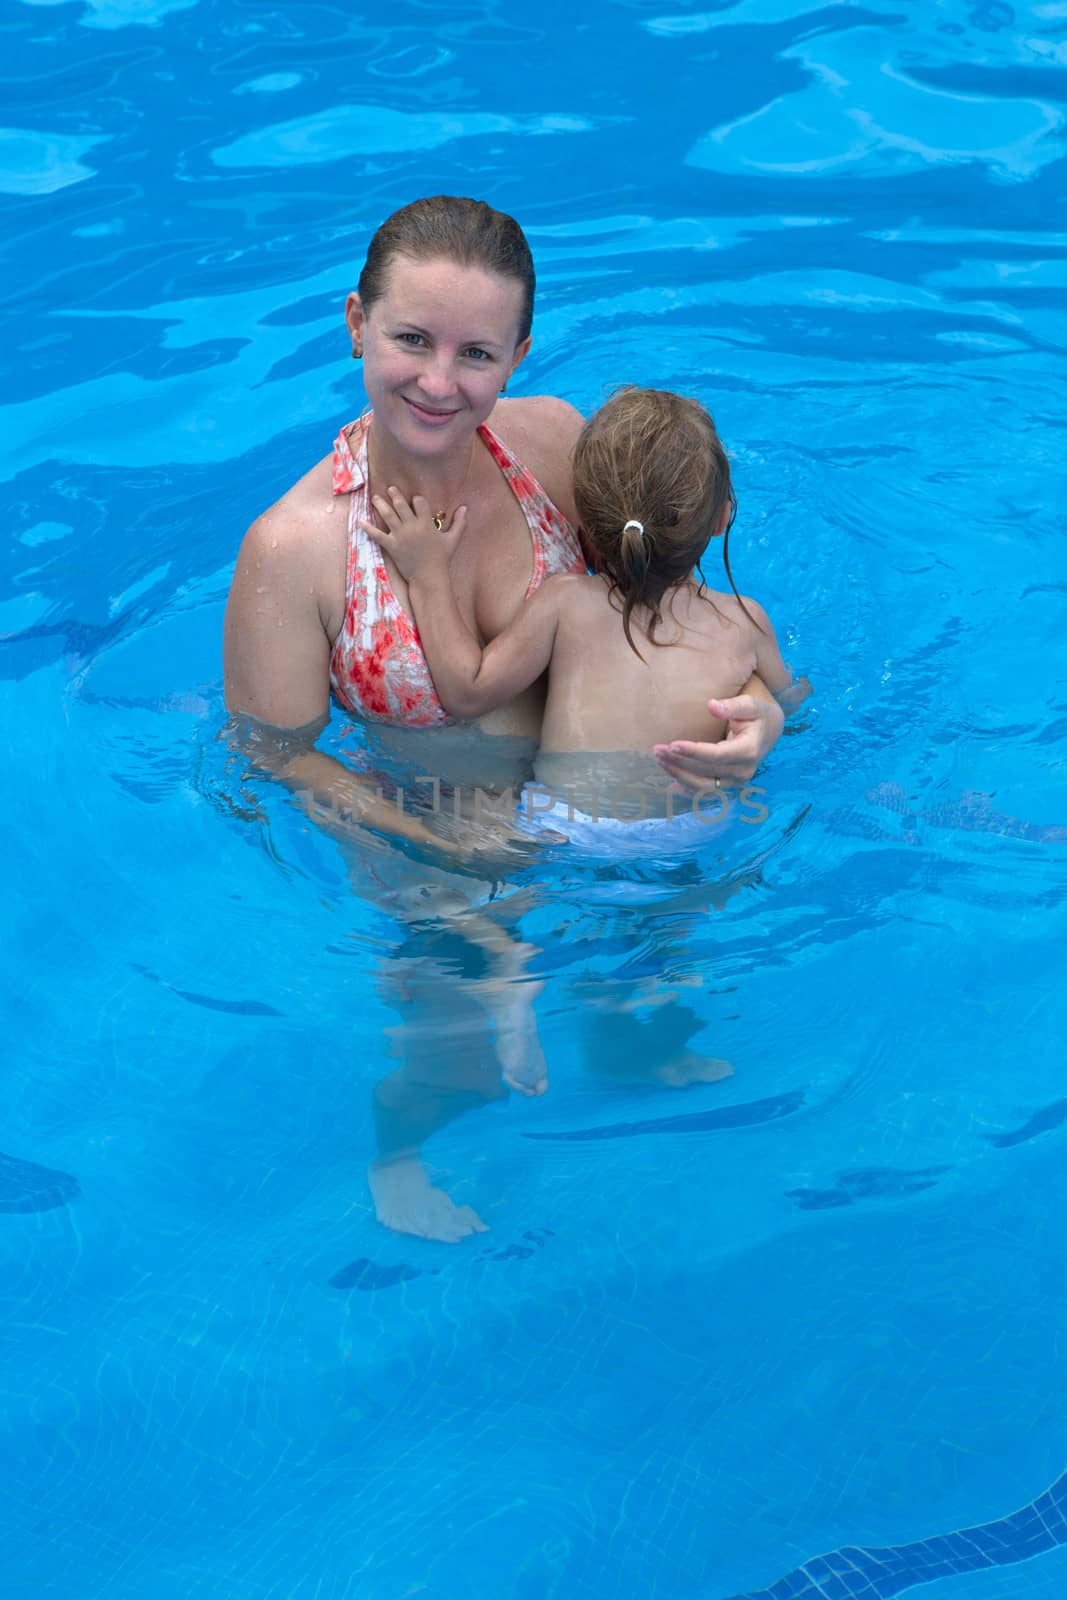 Mother holding her daughter in the swimming pool perhaps teaching her swimming